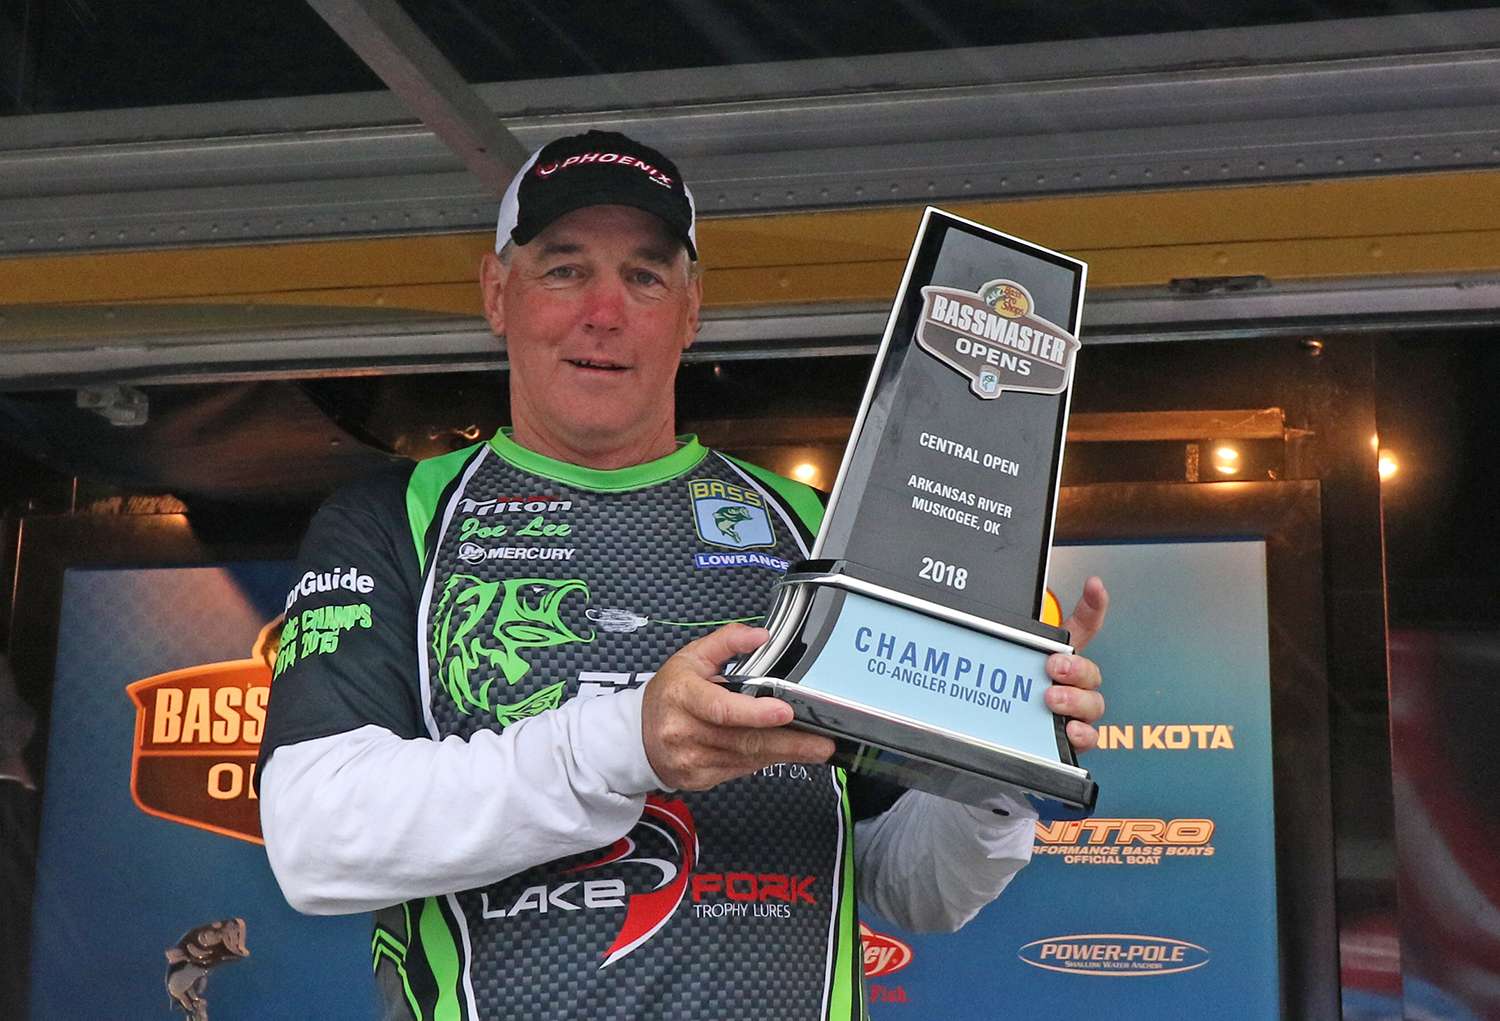 Joe Lee claims the co-angler division championship with a three-day total of 29-1.